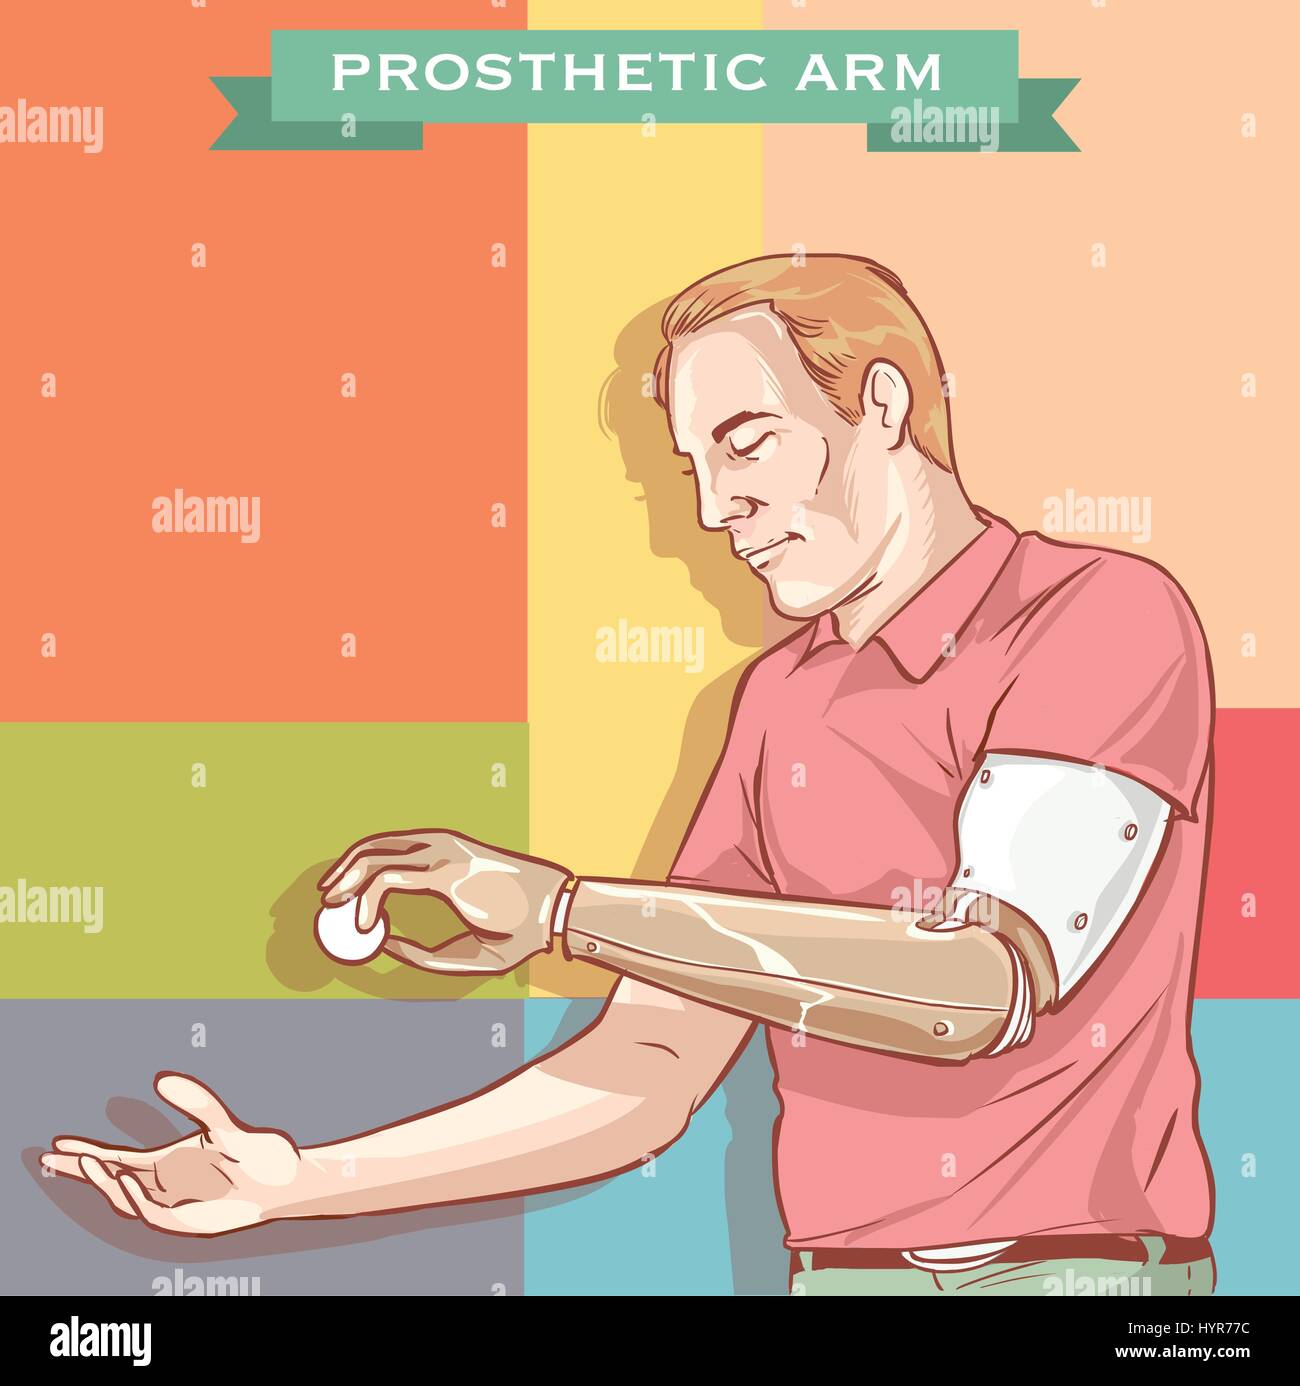 vector illustration of a Man using His Prosthetic Arm Stock Vector